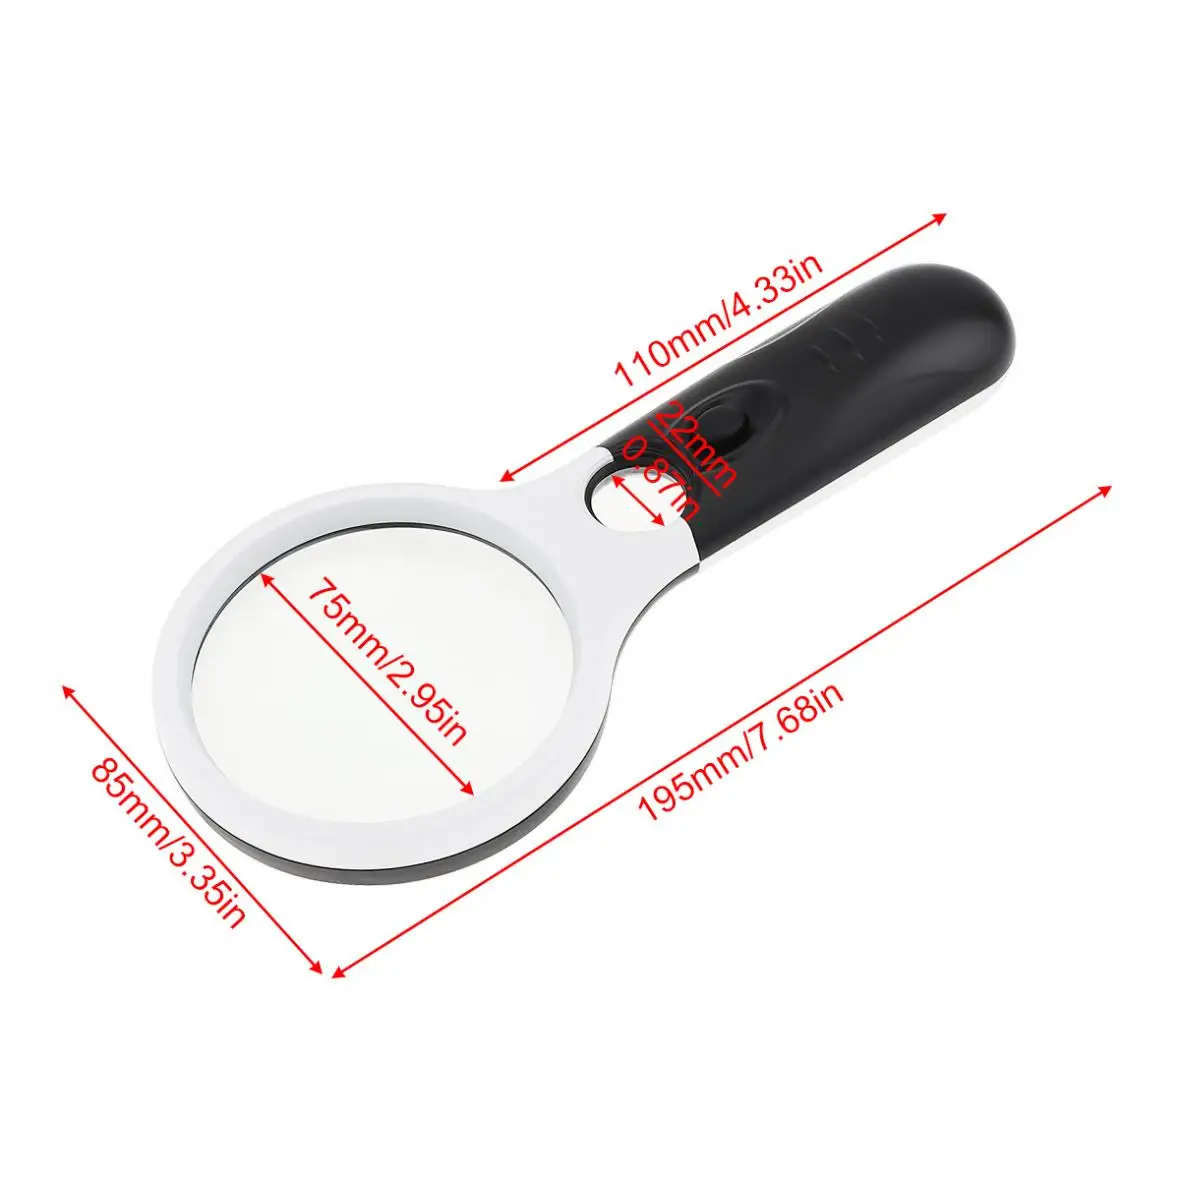 

3X Elastic Multiple Functions Handheld Portable Pocket Magnifier with LED Lights for Repairing and Inspection